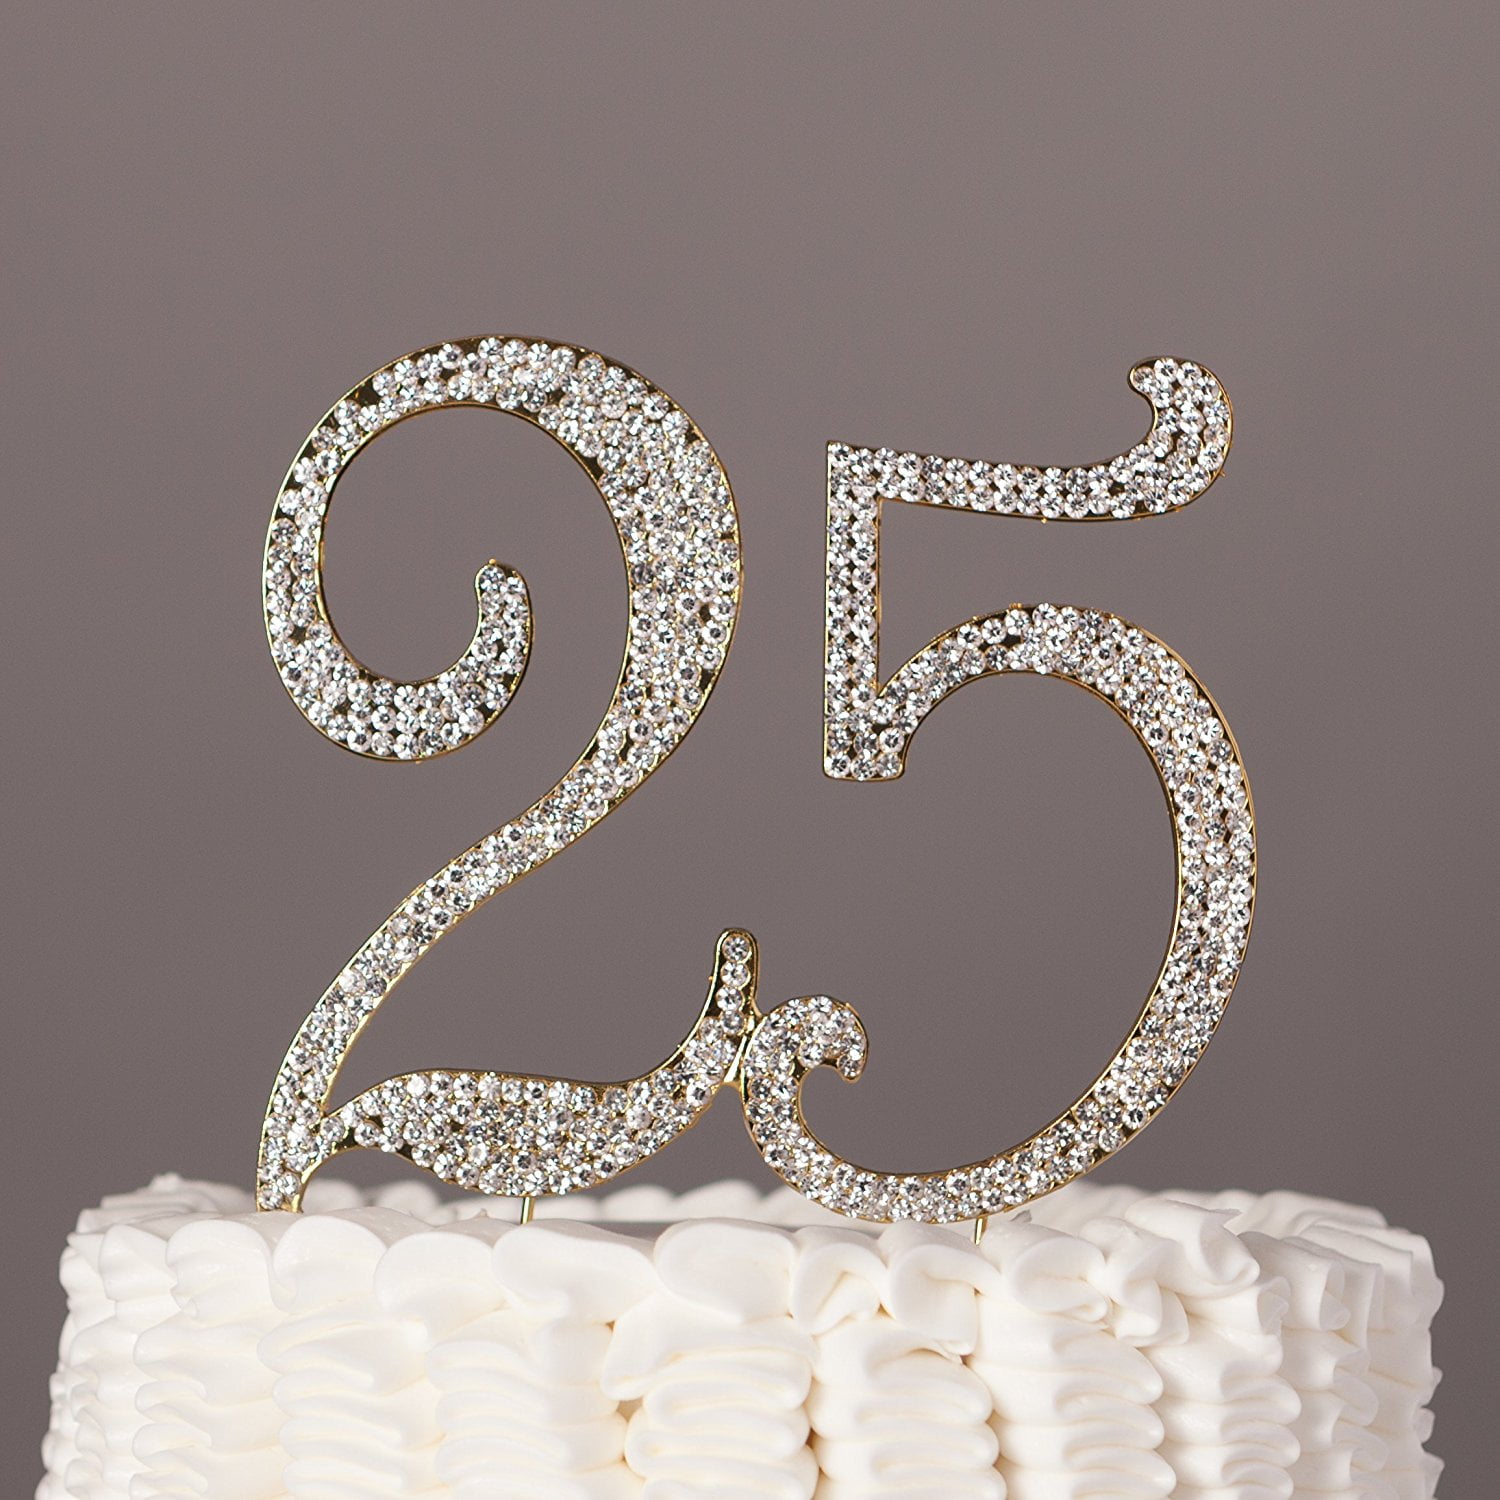 25 Cake Topper For 25th Birthday Or Anniversary Gold Party Supplies